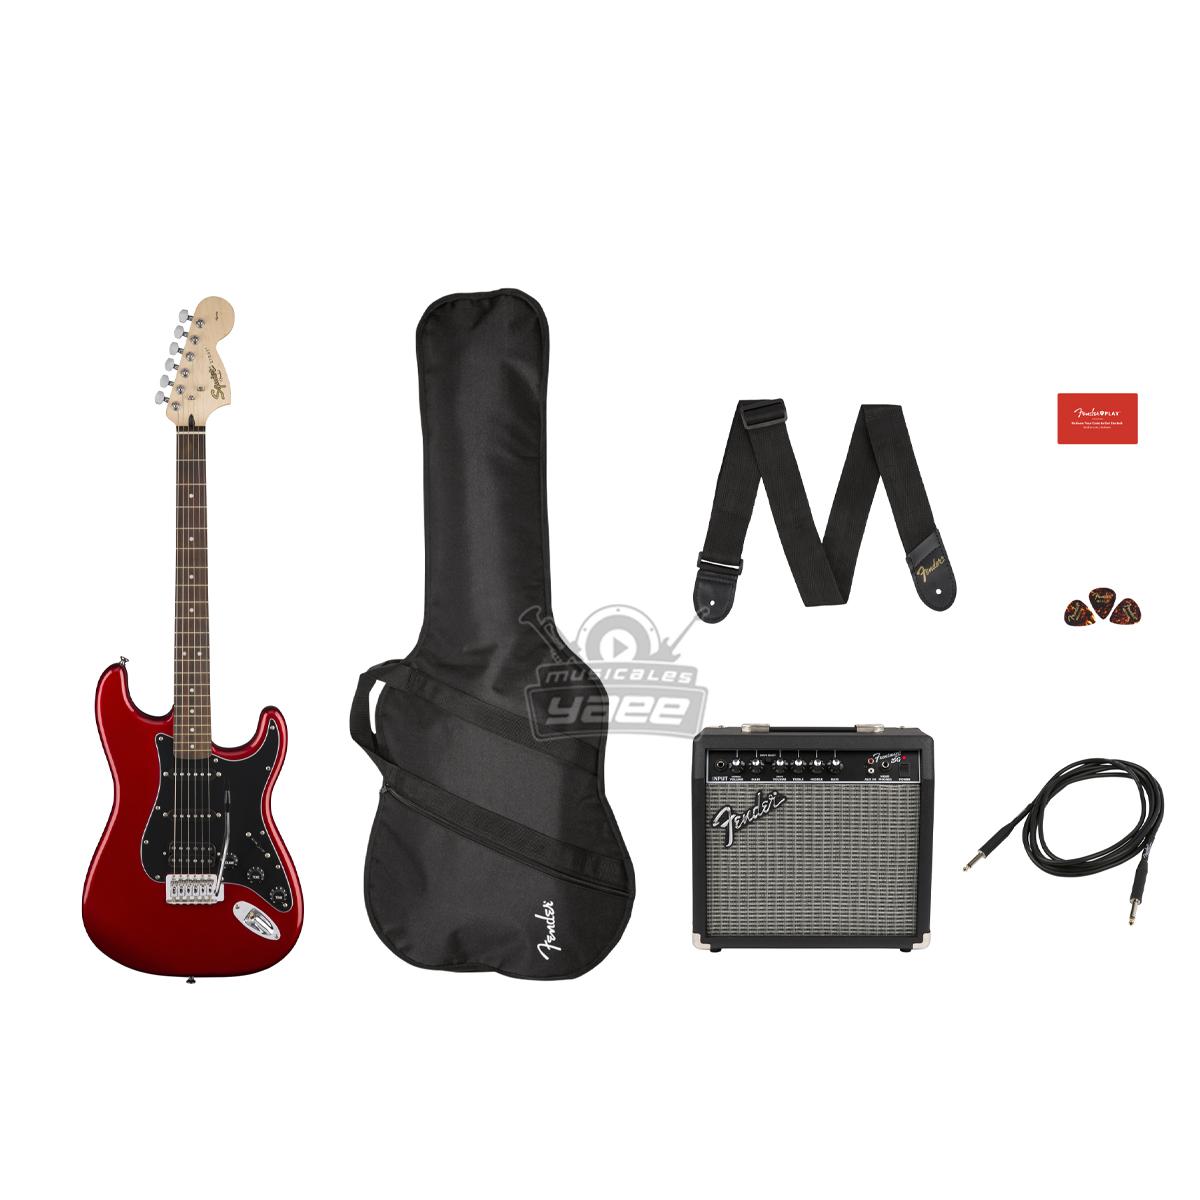 GUITARRA FENDER SQUIER AFFINITY  STRATO HSS LAUREL PAQUETE Candy Apple Red